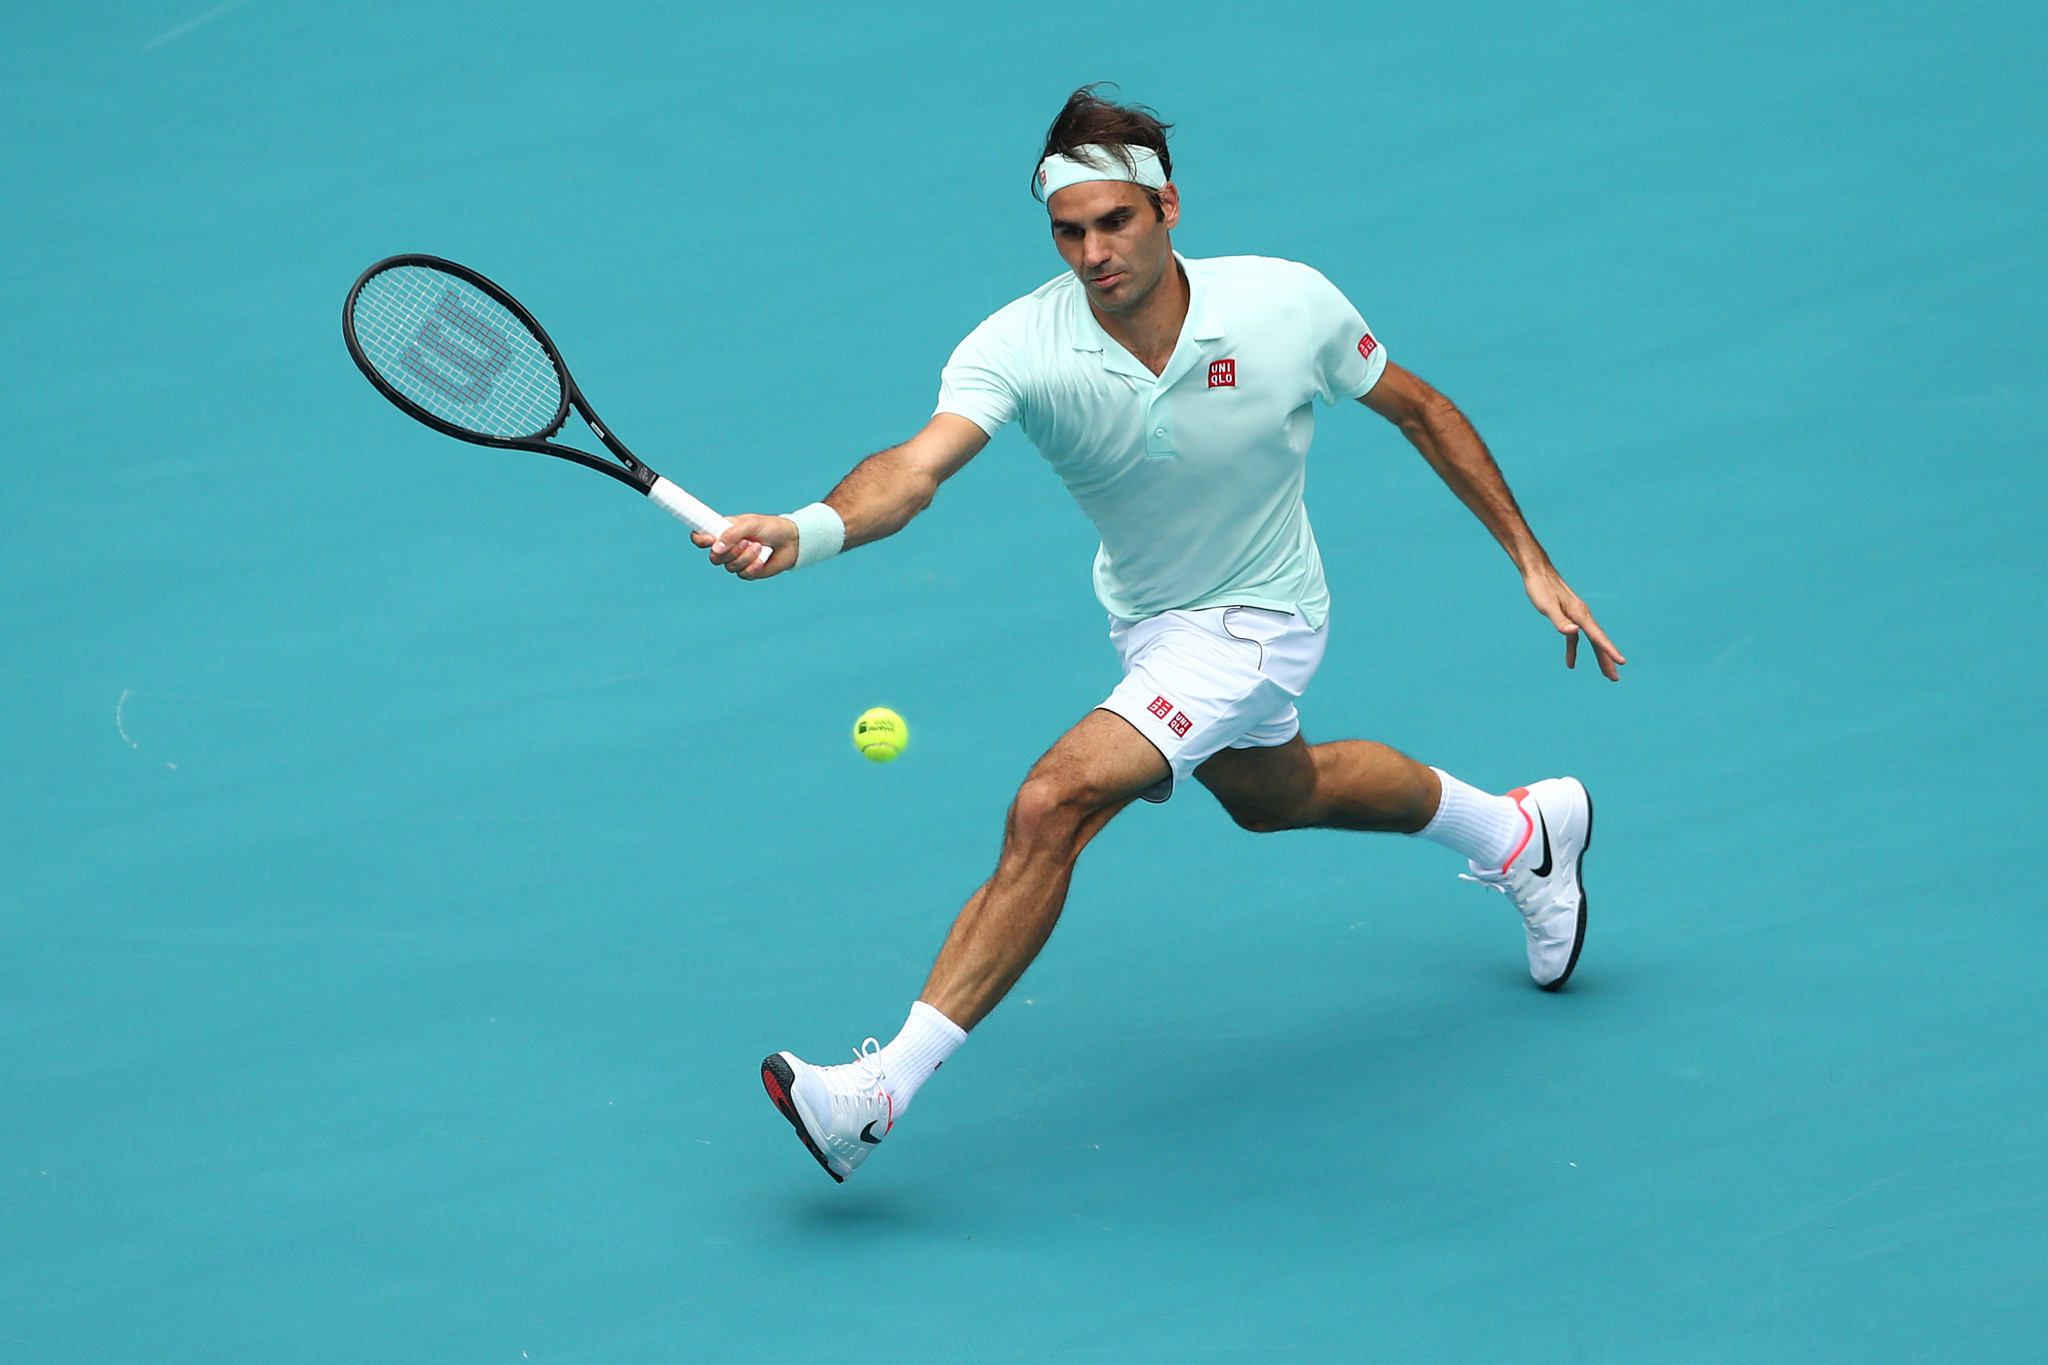 Switzerland's Roger Federer beat John Isner of the United States to win the Miami Open ©Getty Images